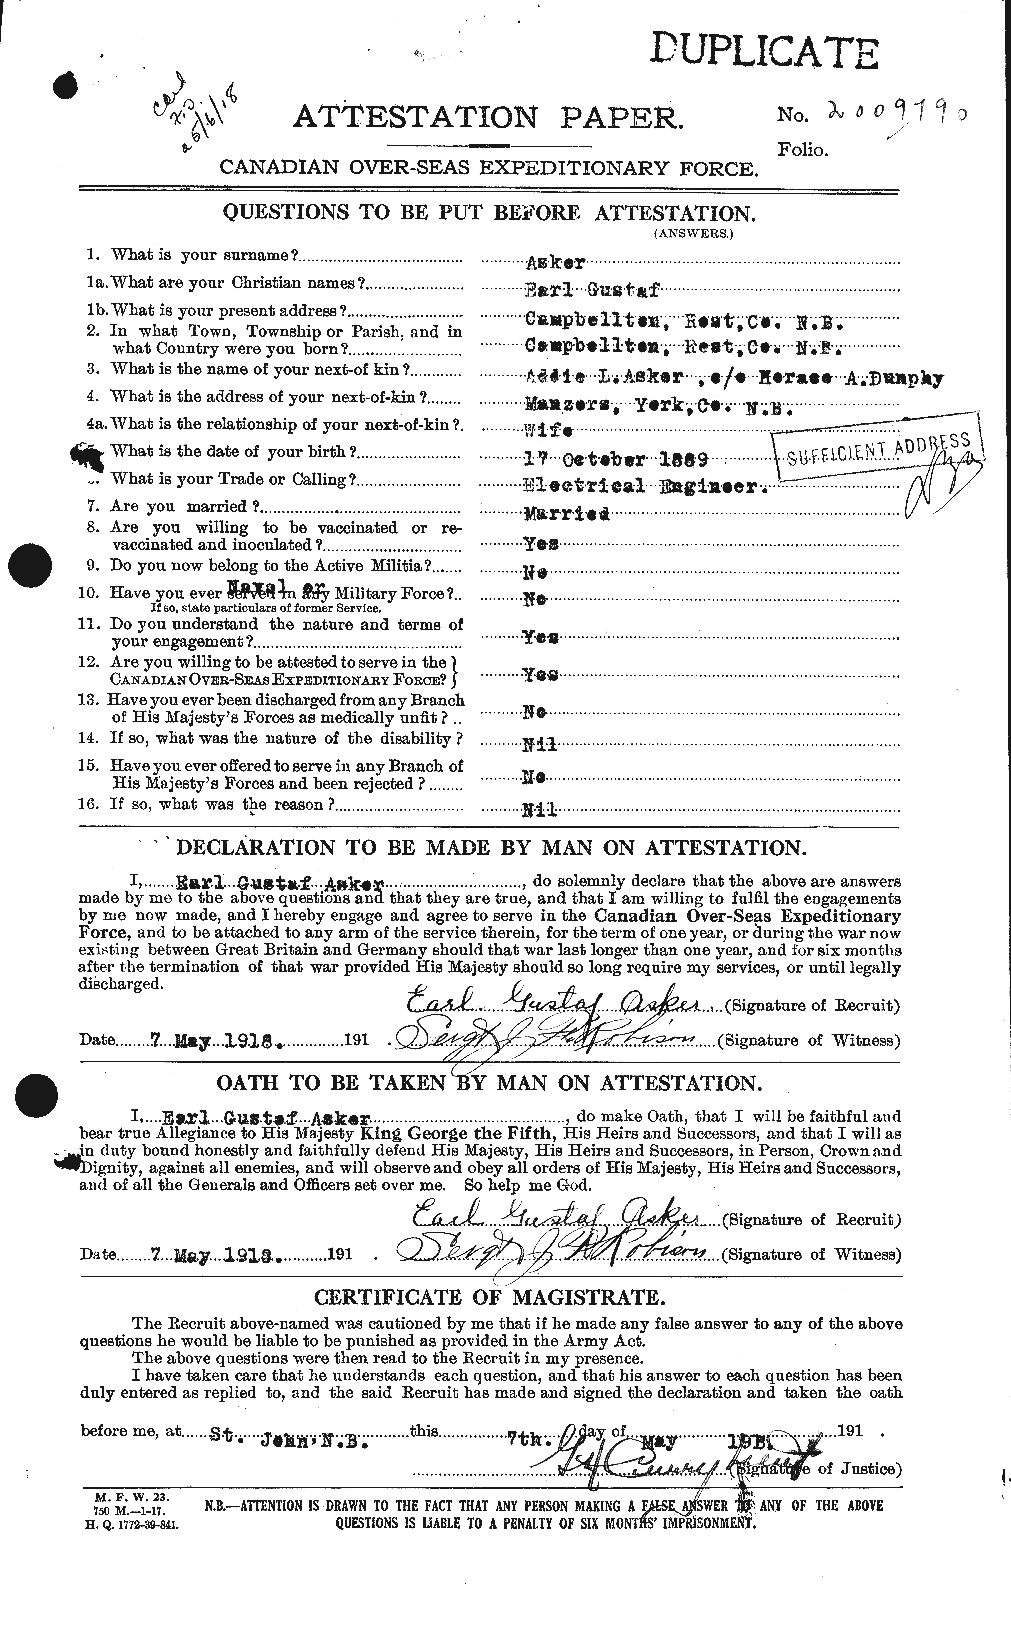 Personnel Records of the First World War - CEF 223689a